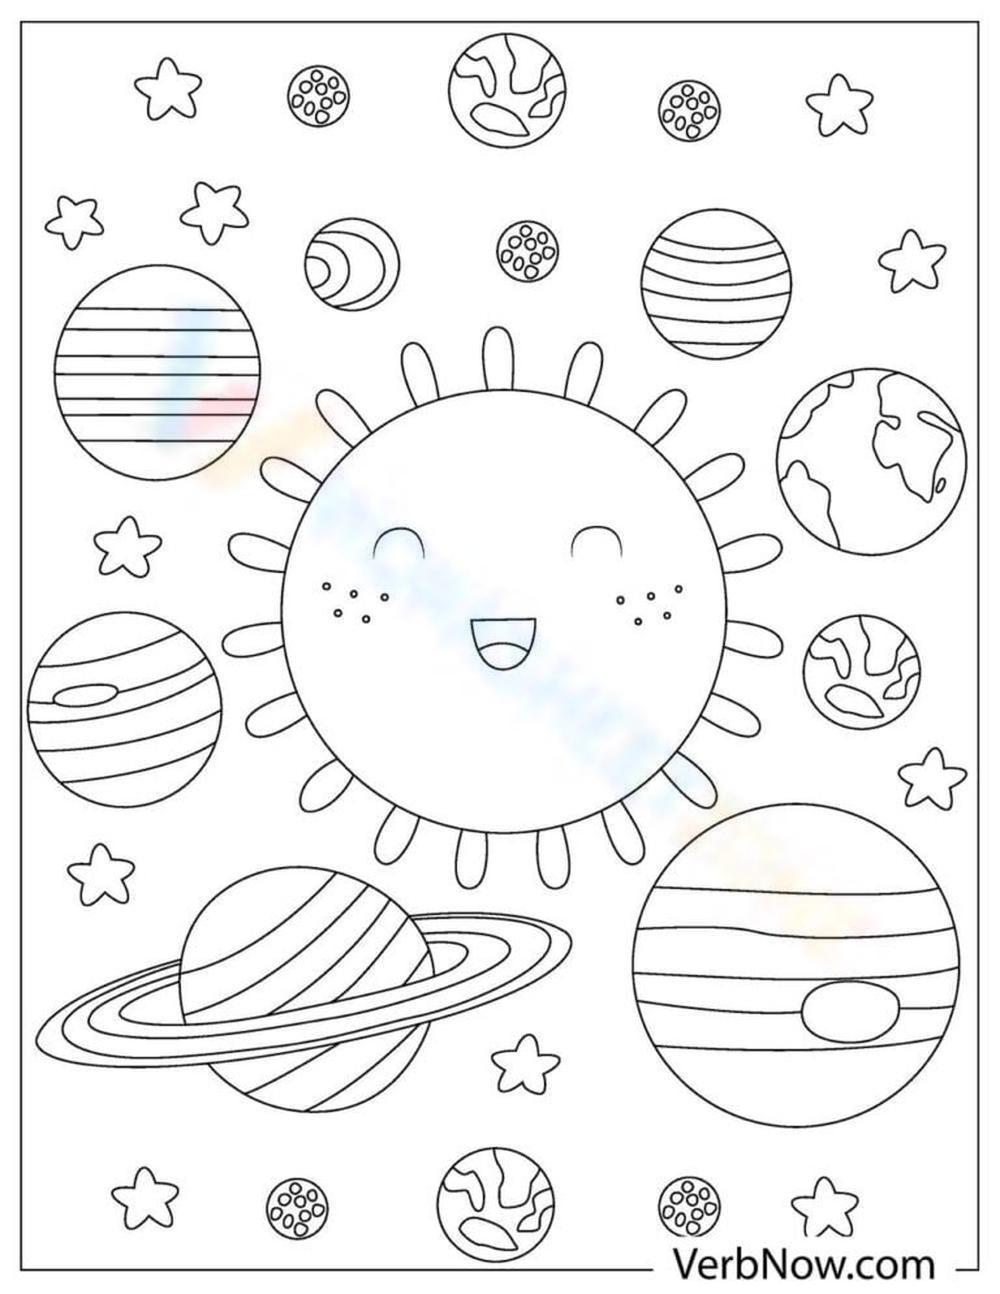 Smiley sun and solar system